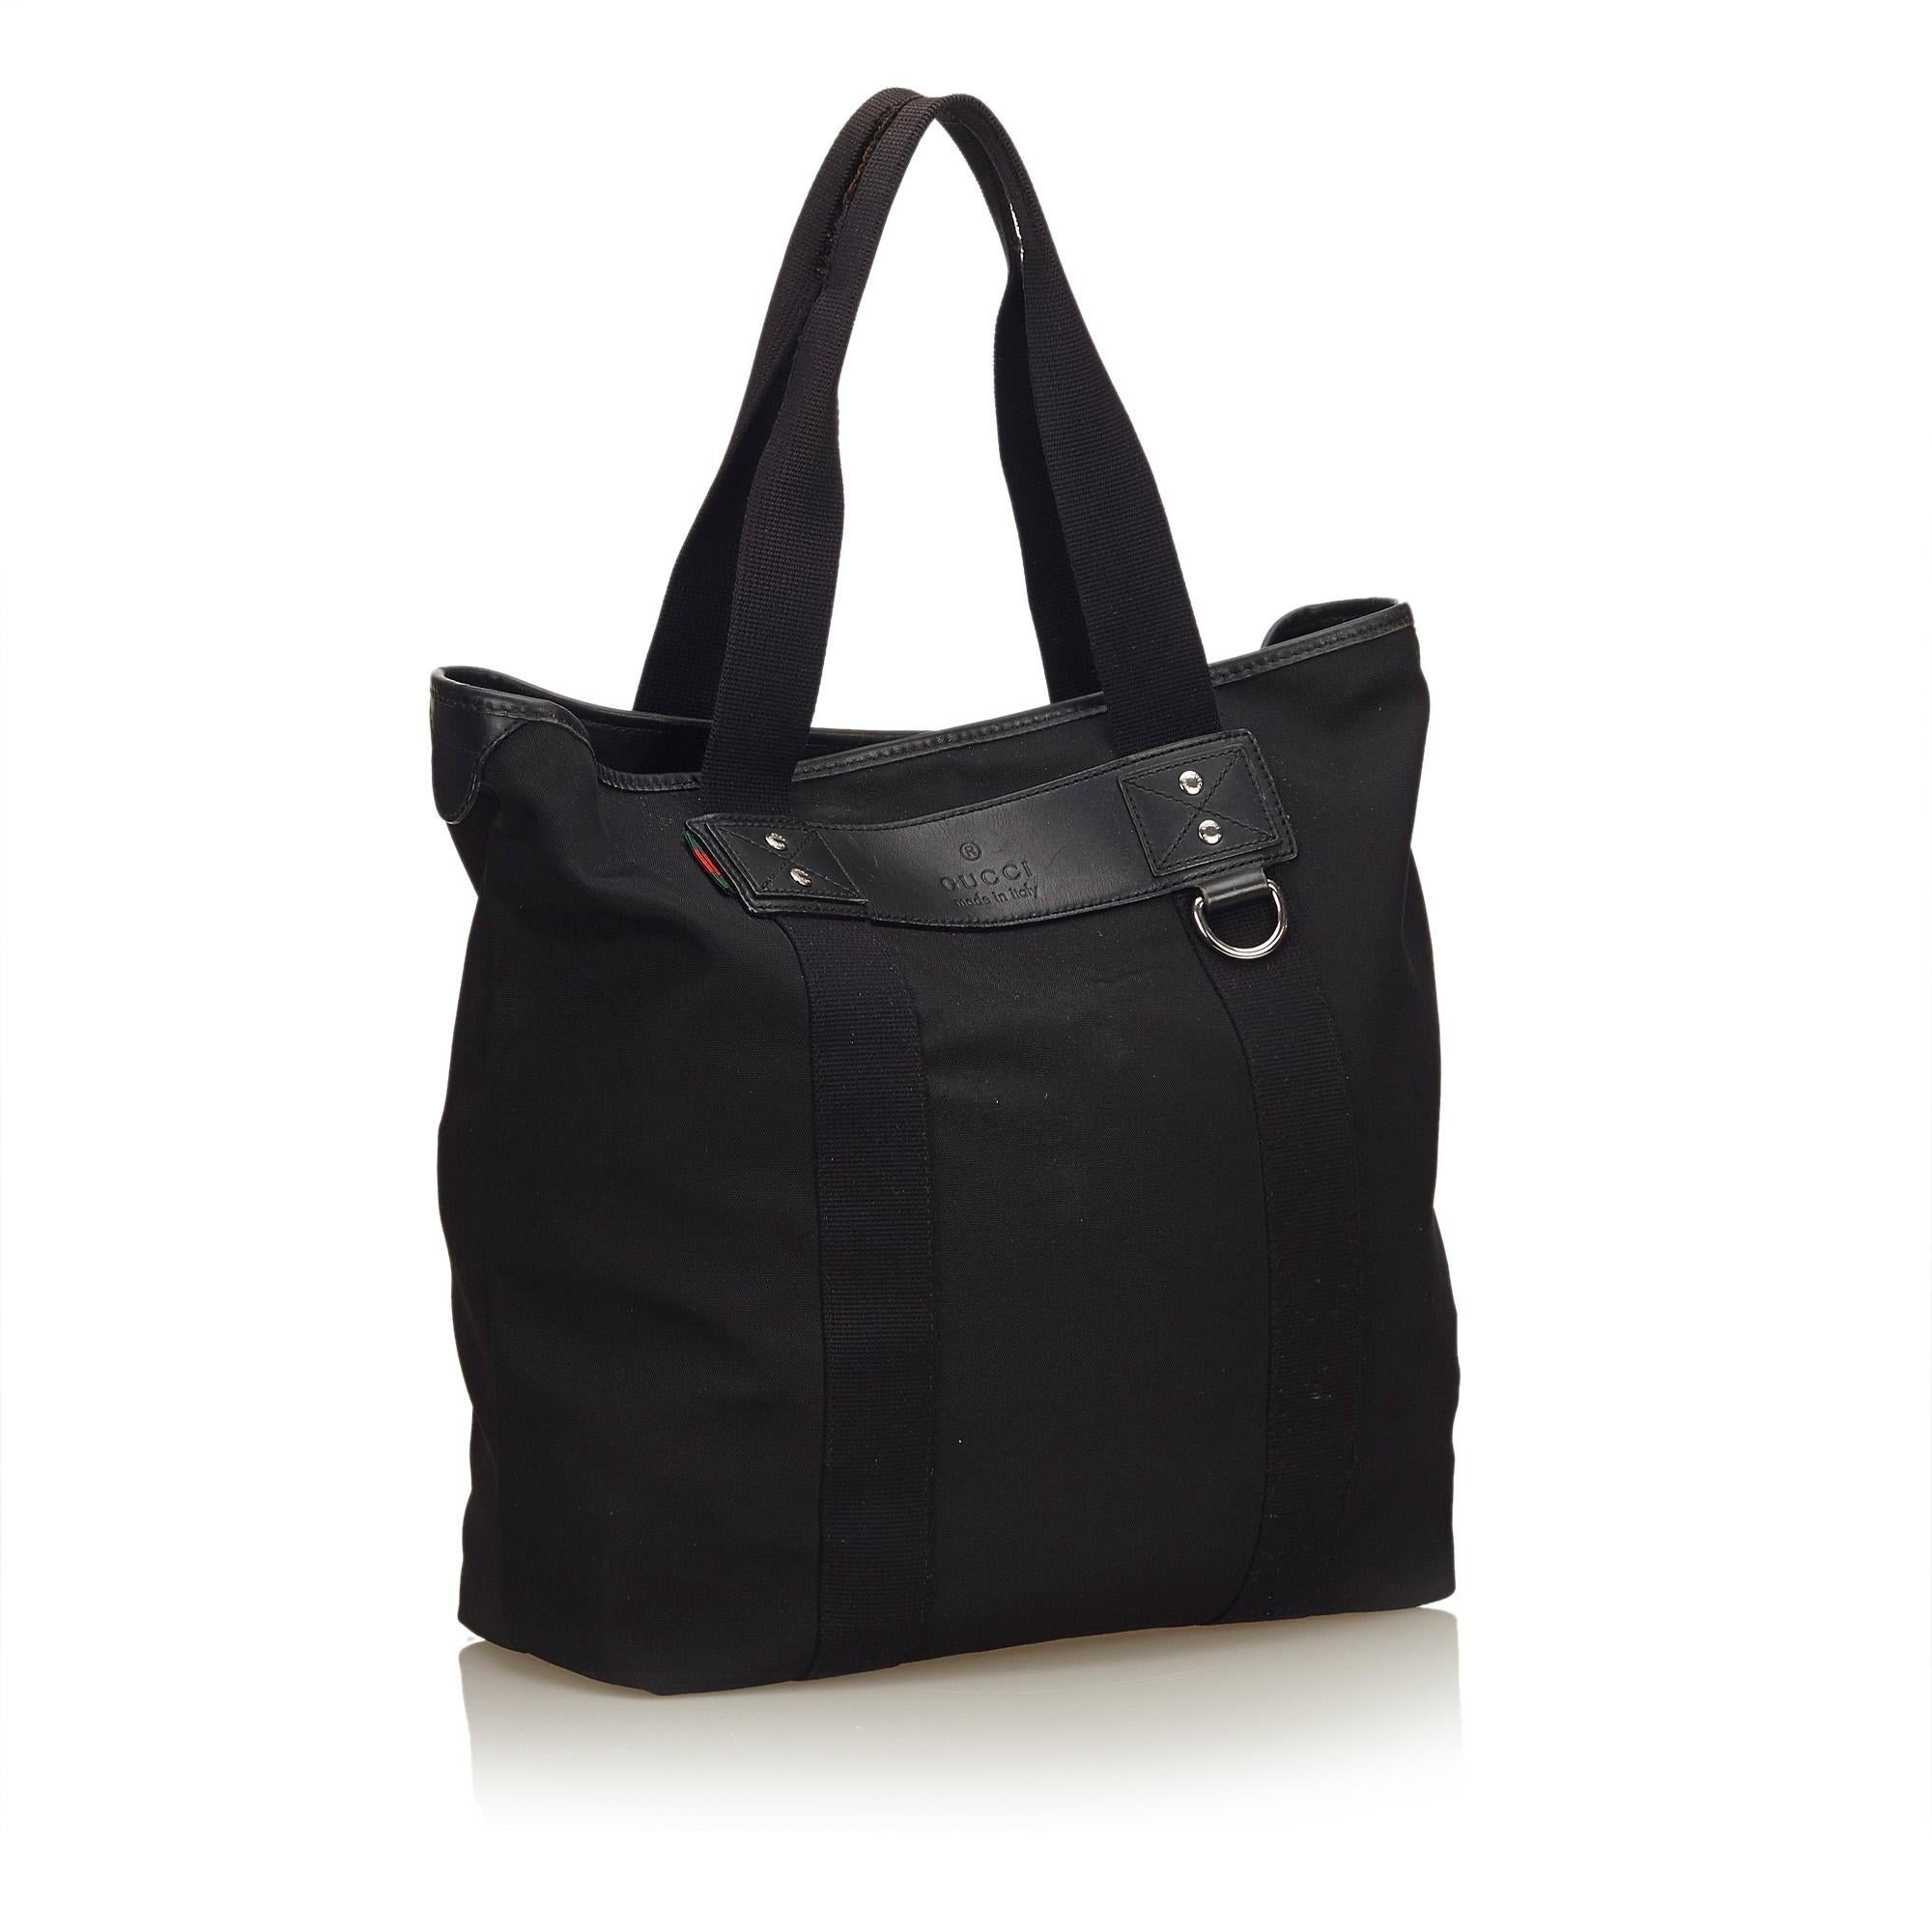 This tote bag features a canvas body with leather trim, flat straps, open top, and interior zip and slip pockets. It carries as AB condition rating.

Inclusions: 
This item does not come with inclusions.

Dimensions:
Length: 35.00 cm
Width: 40.00